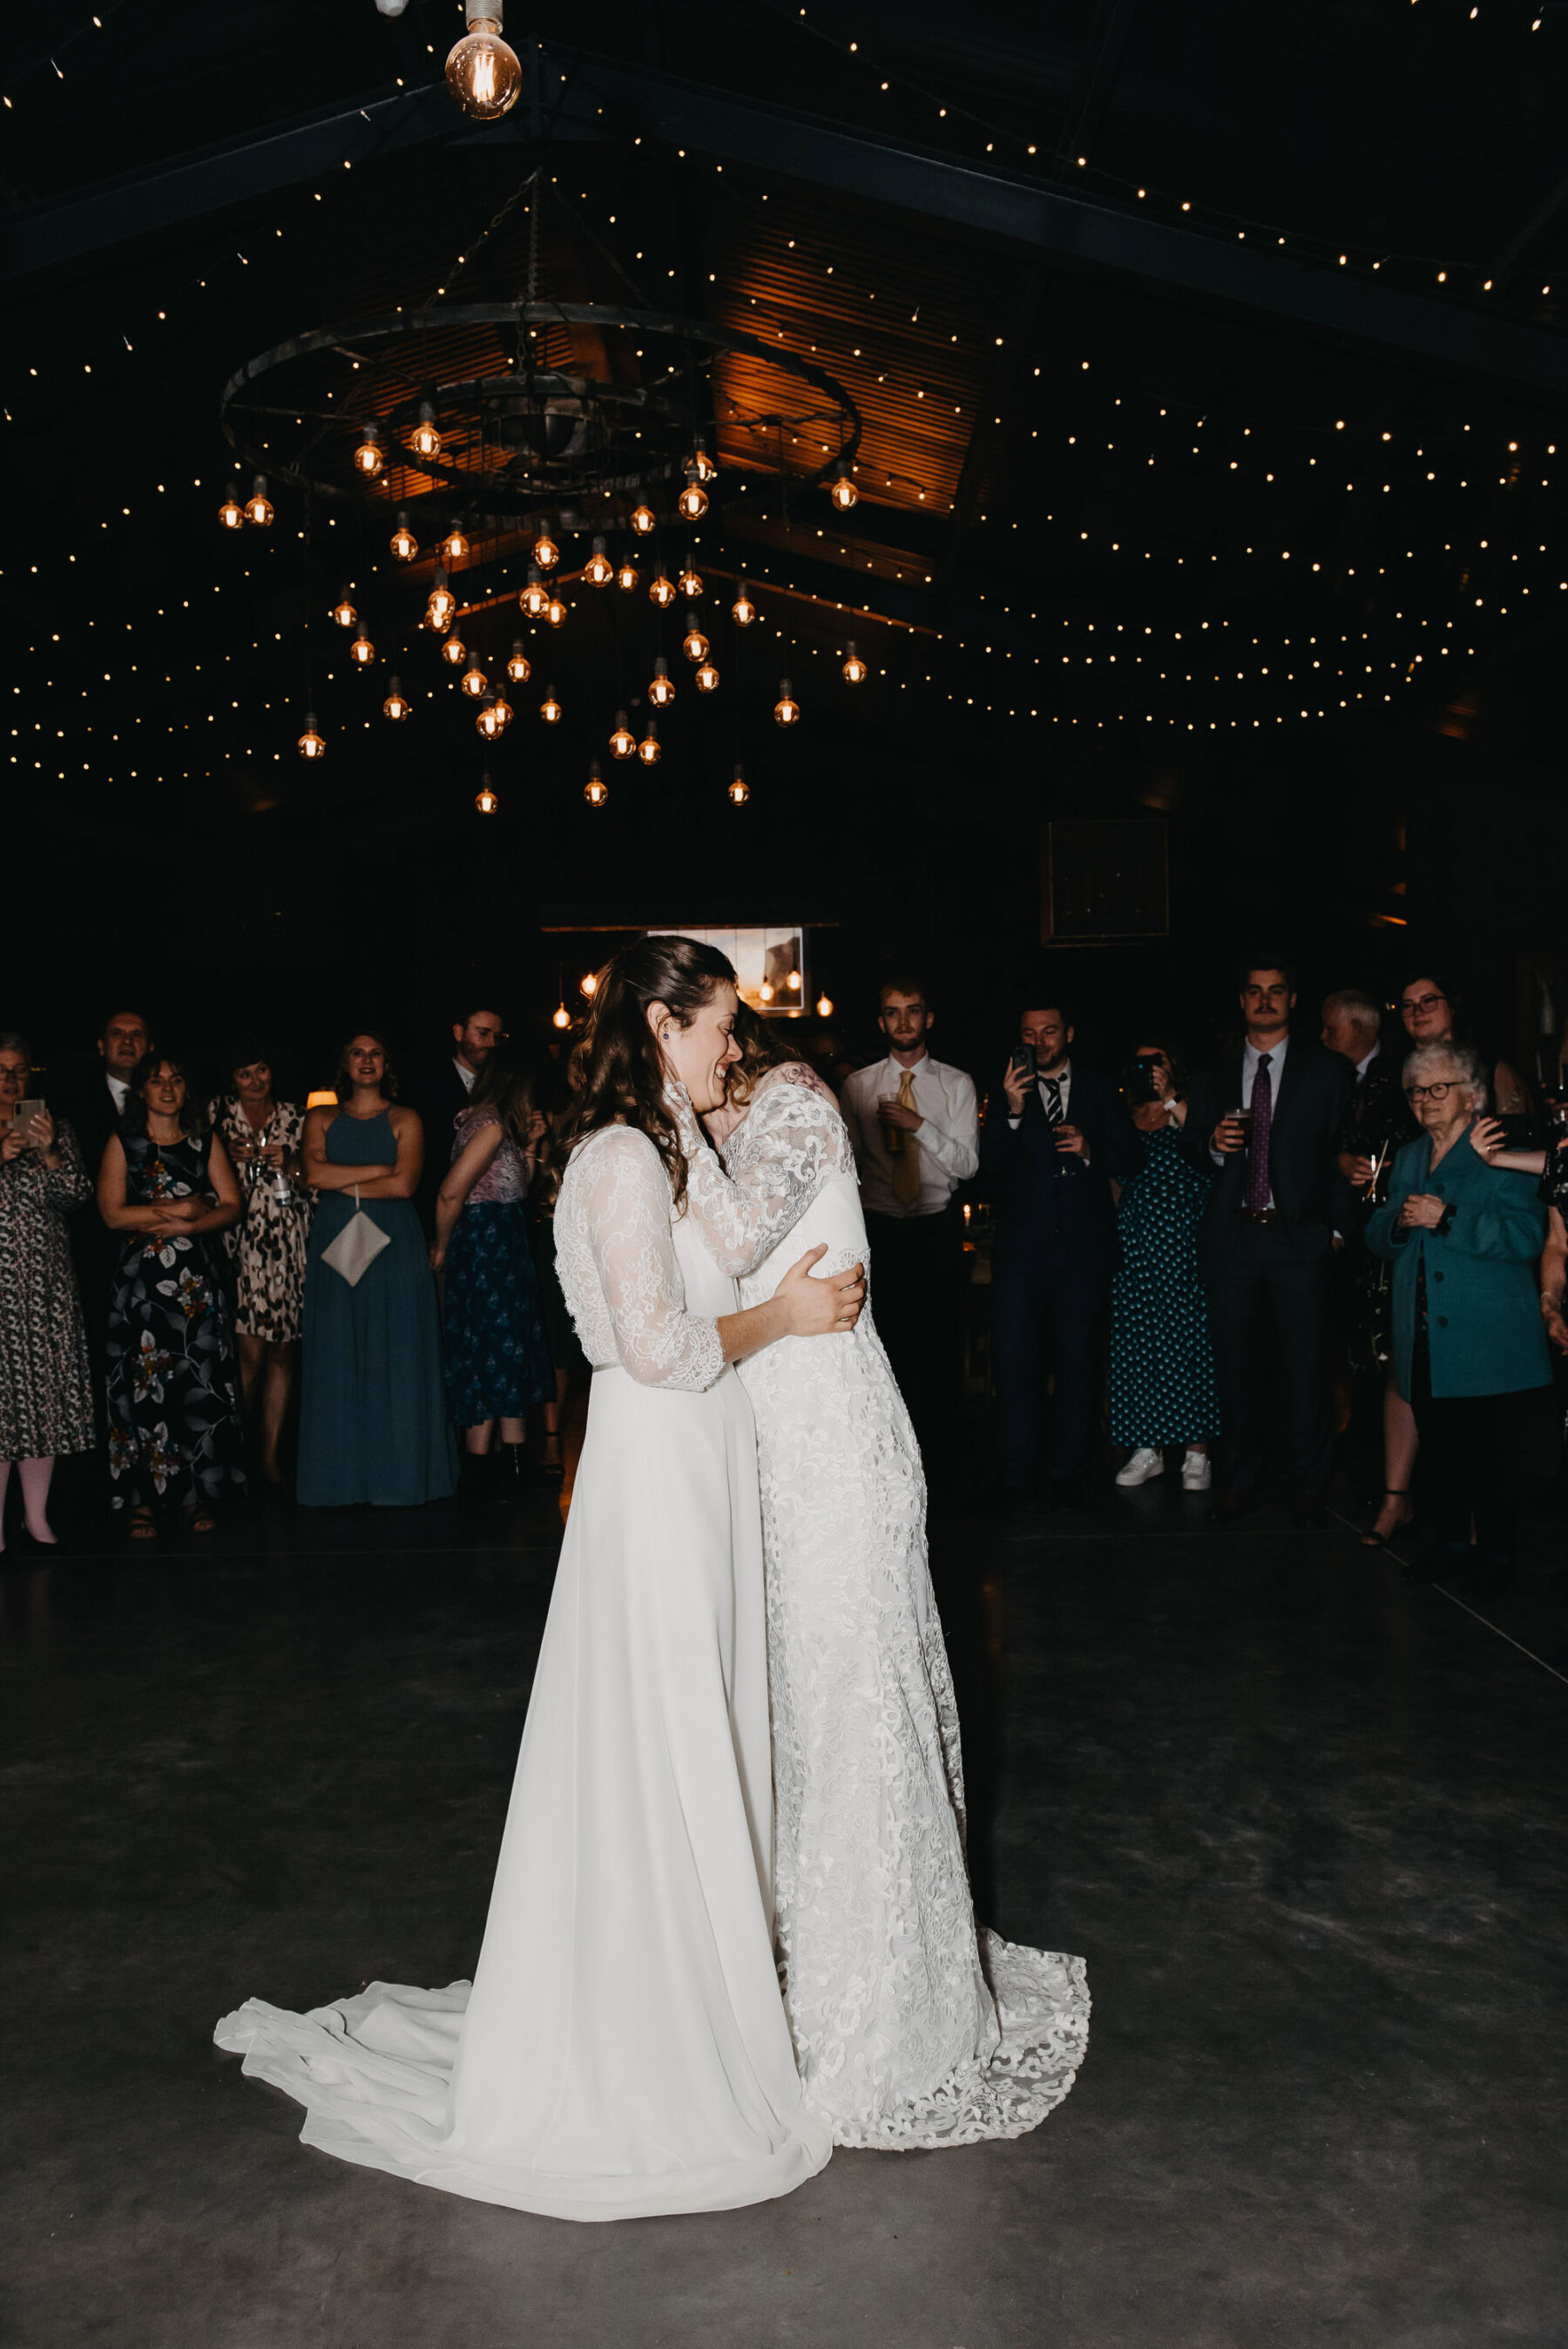 Two brides at LGBTQ+ wedding on the dancefloor. Jessica Grace Photography.